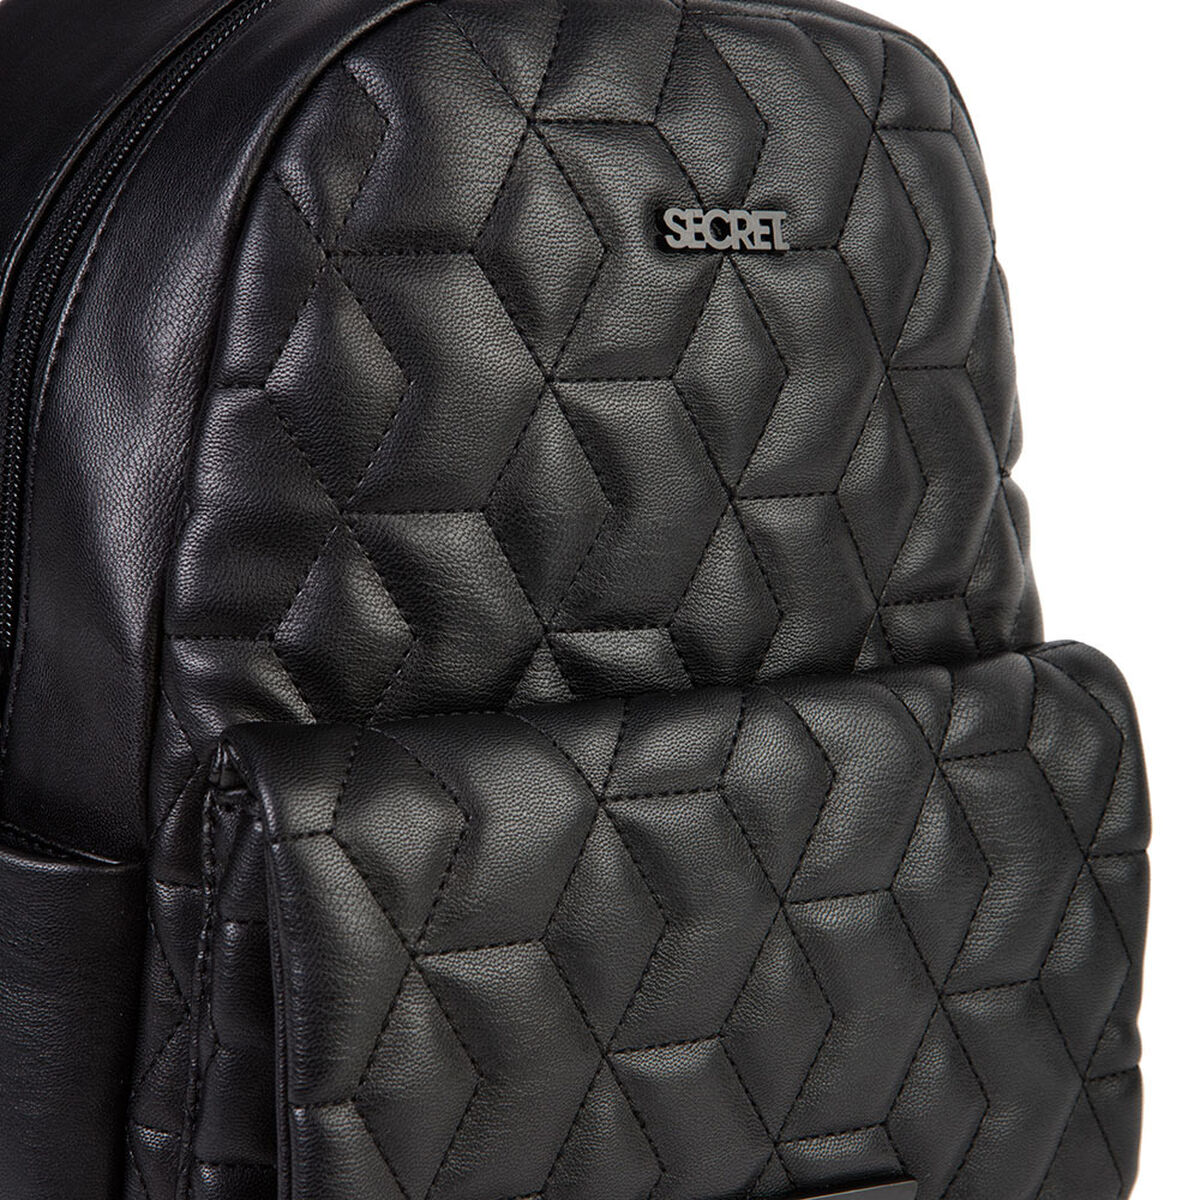 Backpack M Waterford Negra